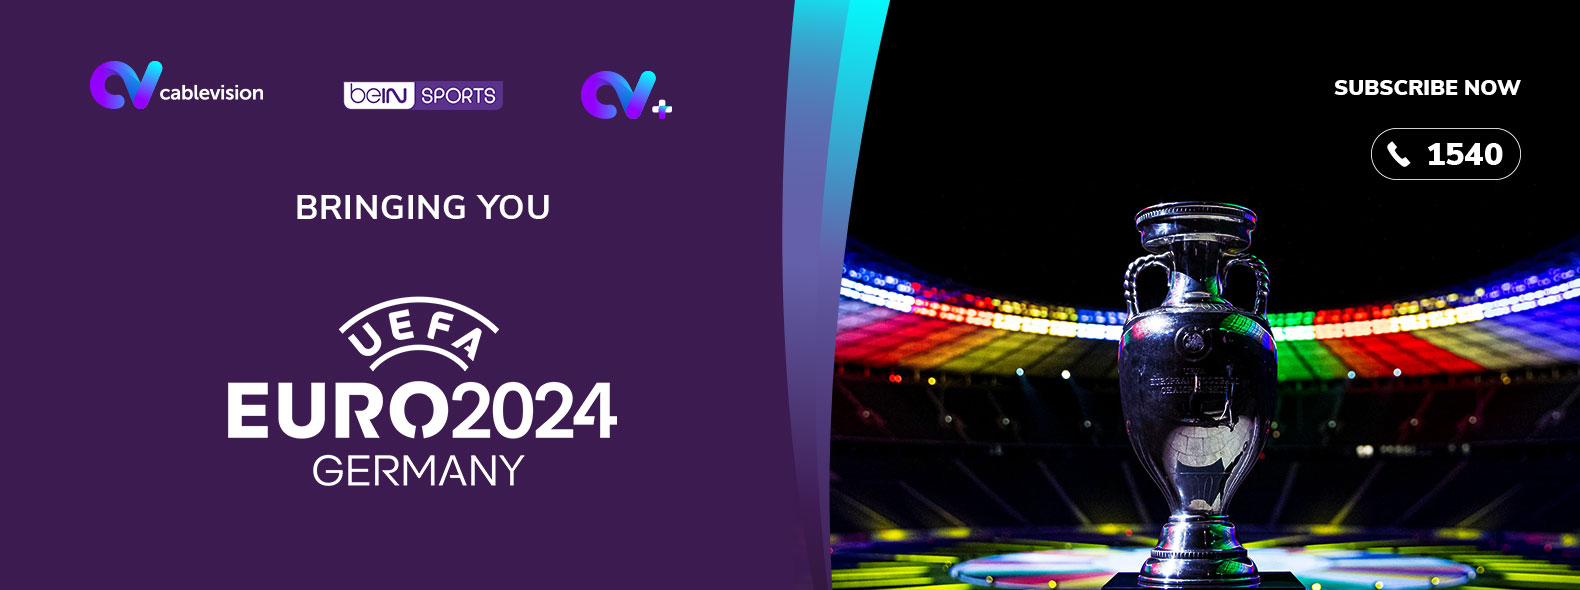 UEFA EuroCup 2024 now on Cablevision